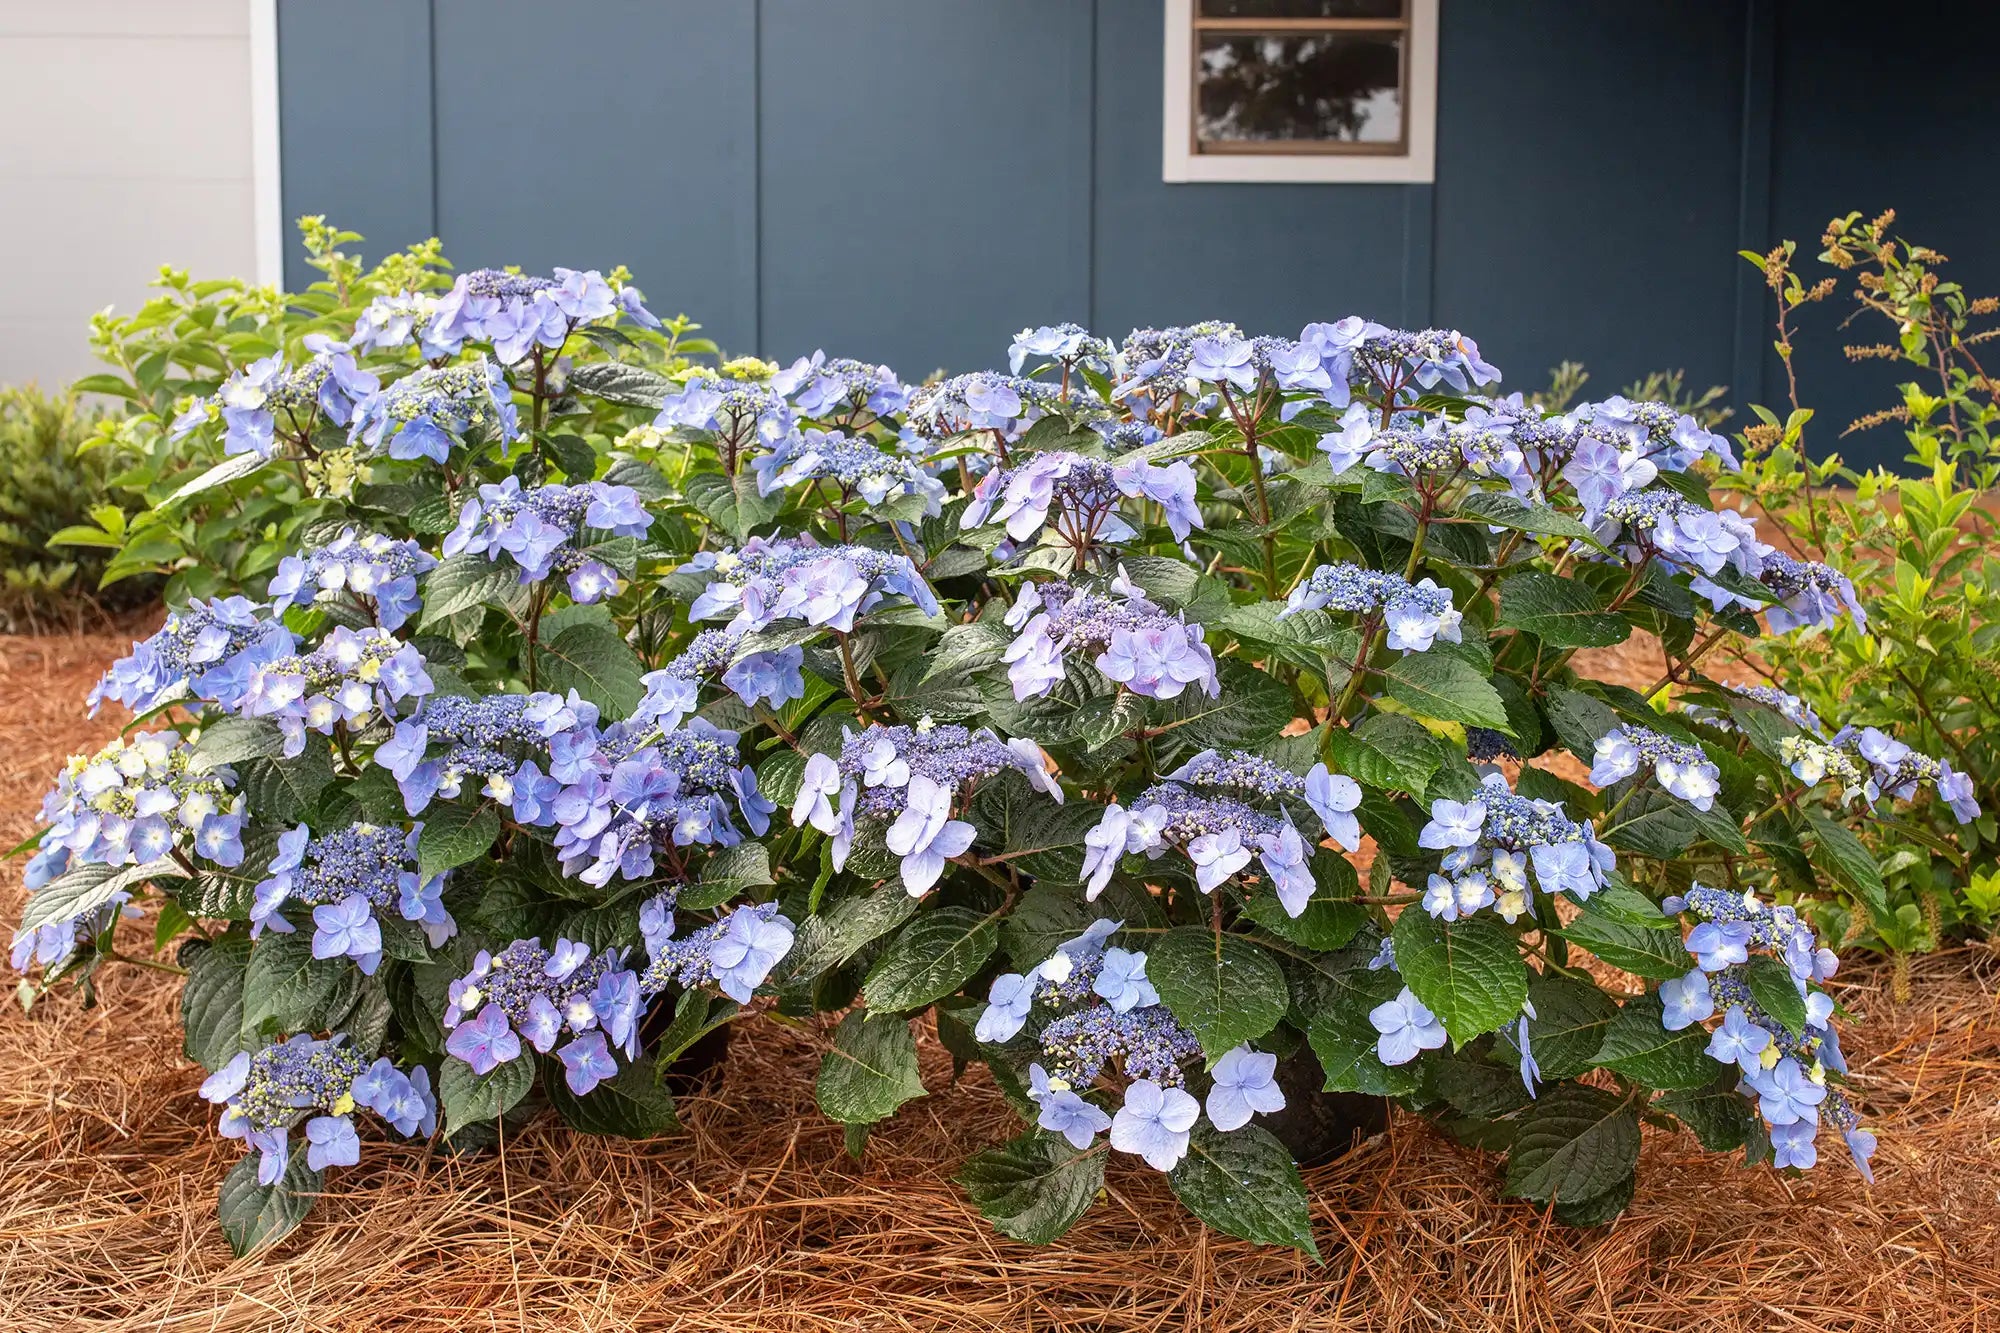 Scene of Pop Star® Hydrangea in natural pine needle mulch in front of a residence painted farmhouse style blue. Individual clumps of blue hydrangeas appear like a fireworks display amid green foliage. 